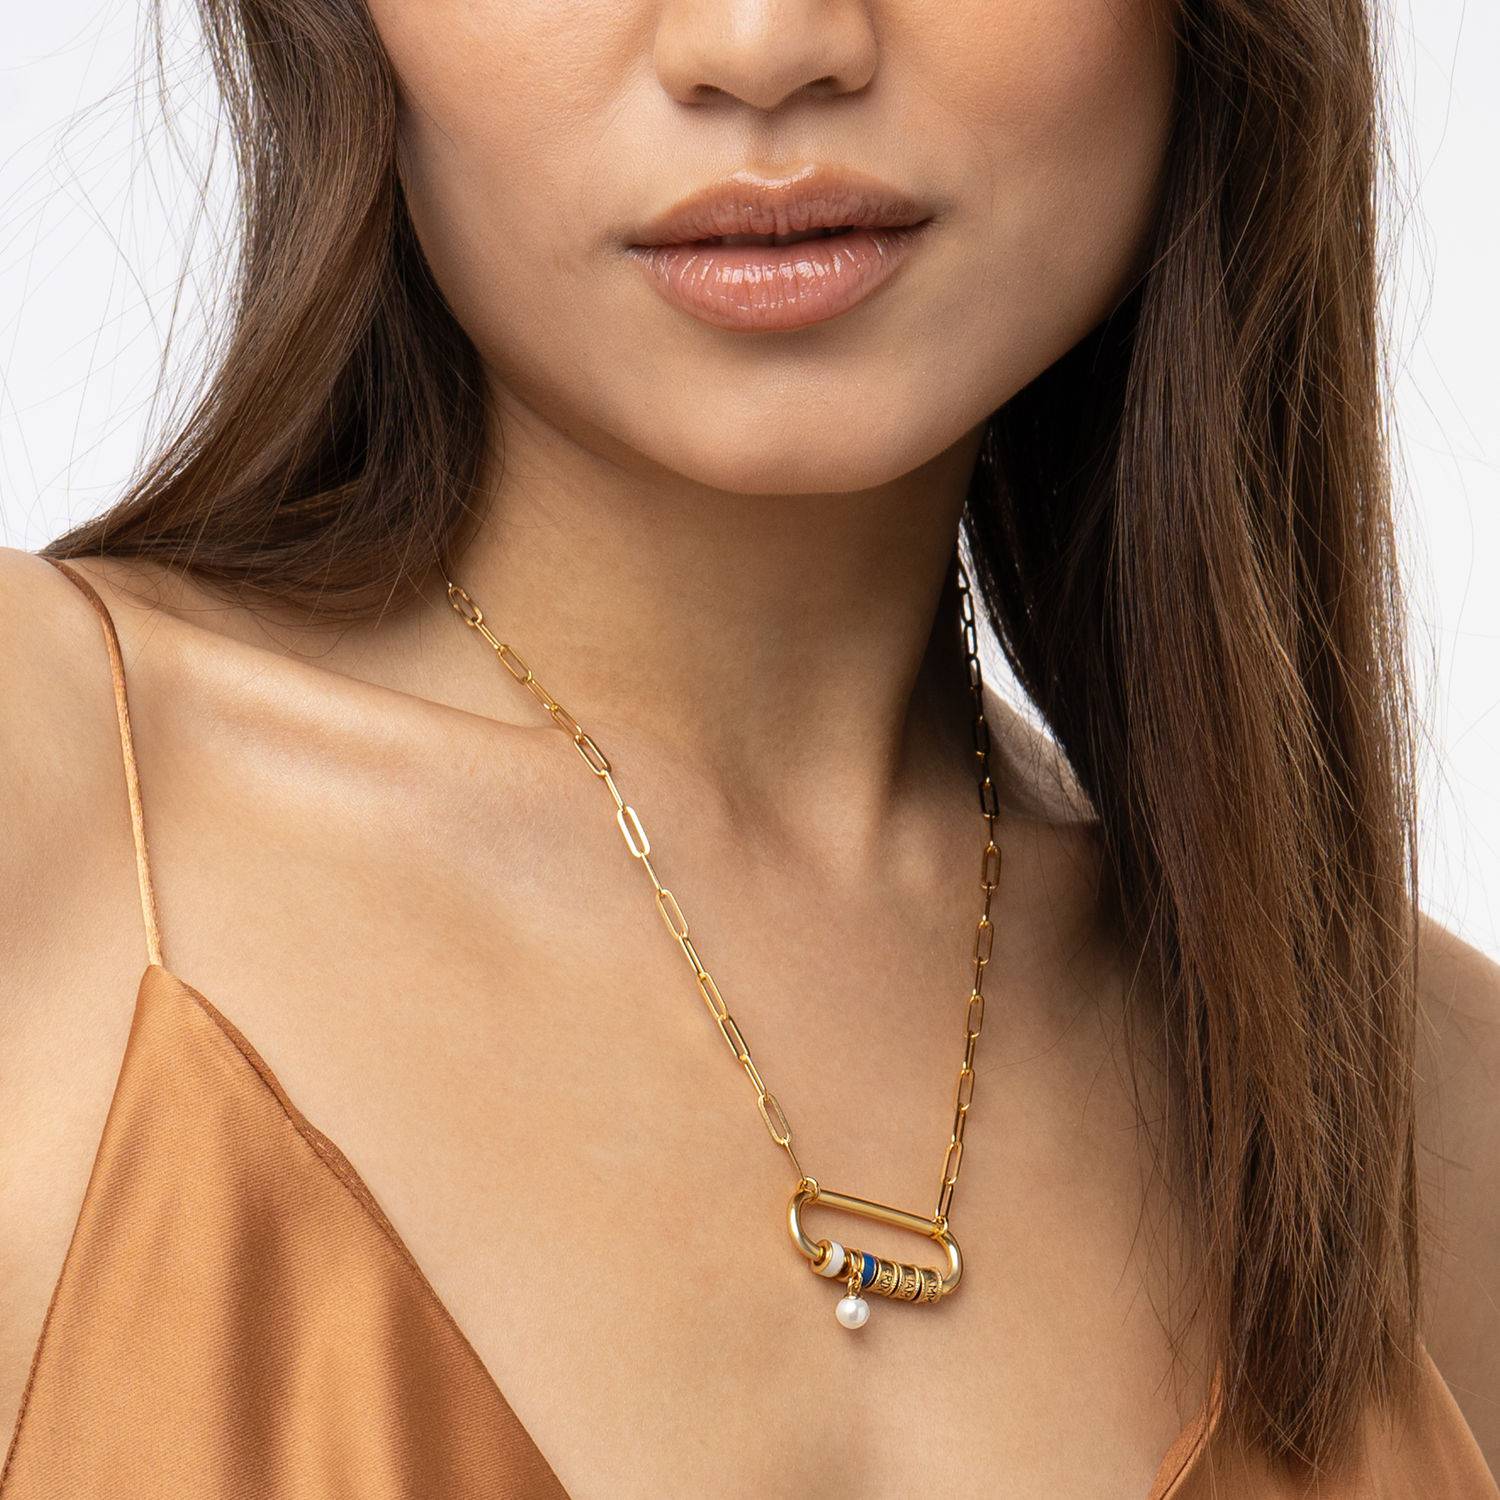 Linda Carabiner Necklace With Pearl in 18K Gold Plating - MYKA